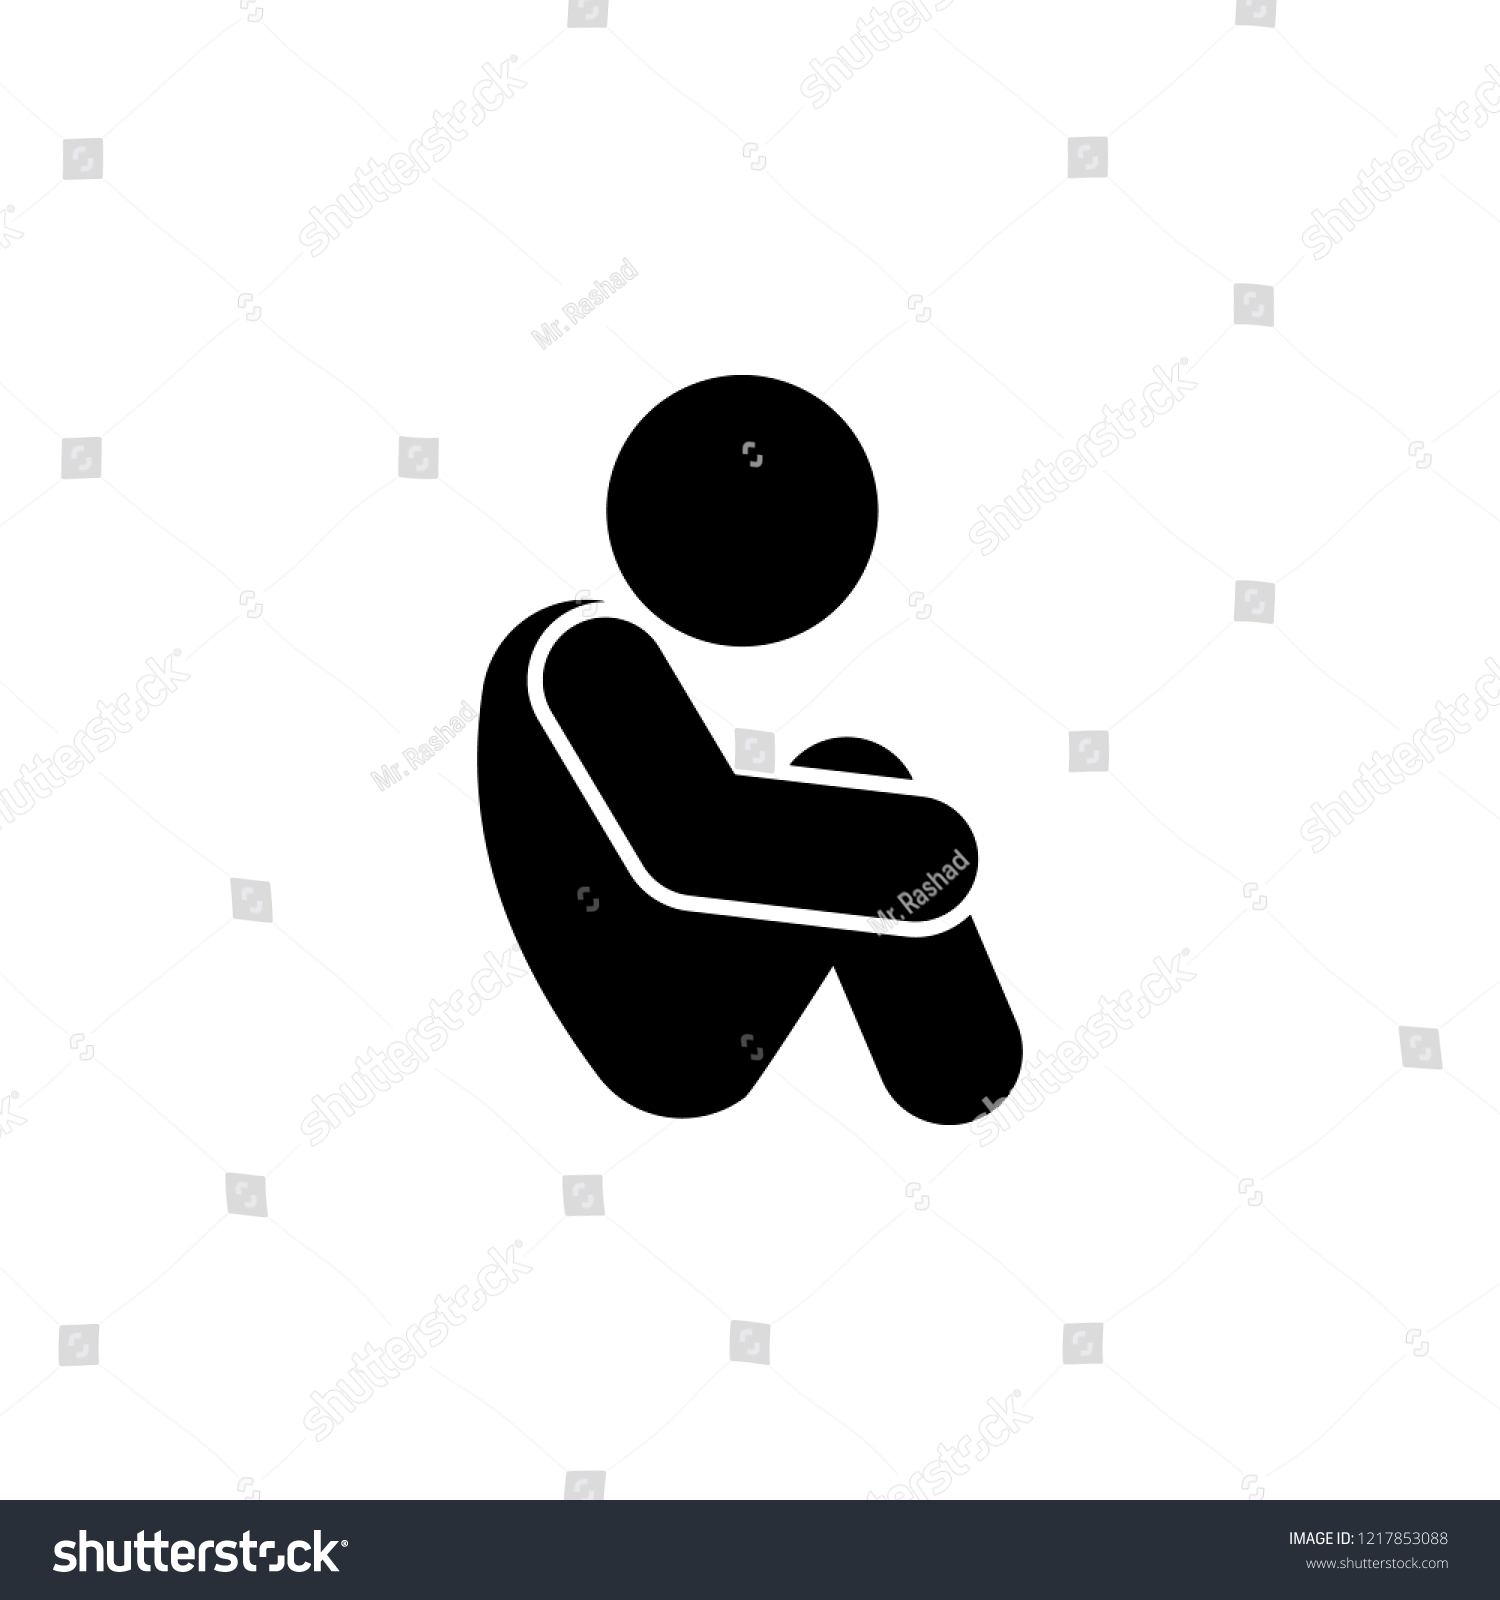 15,434 Child cry icons Images, Stock Photos & Vectors | Shutterstock